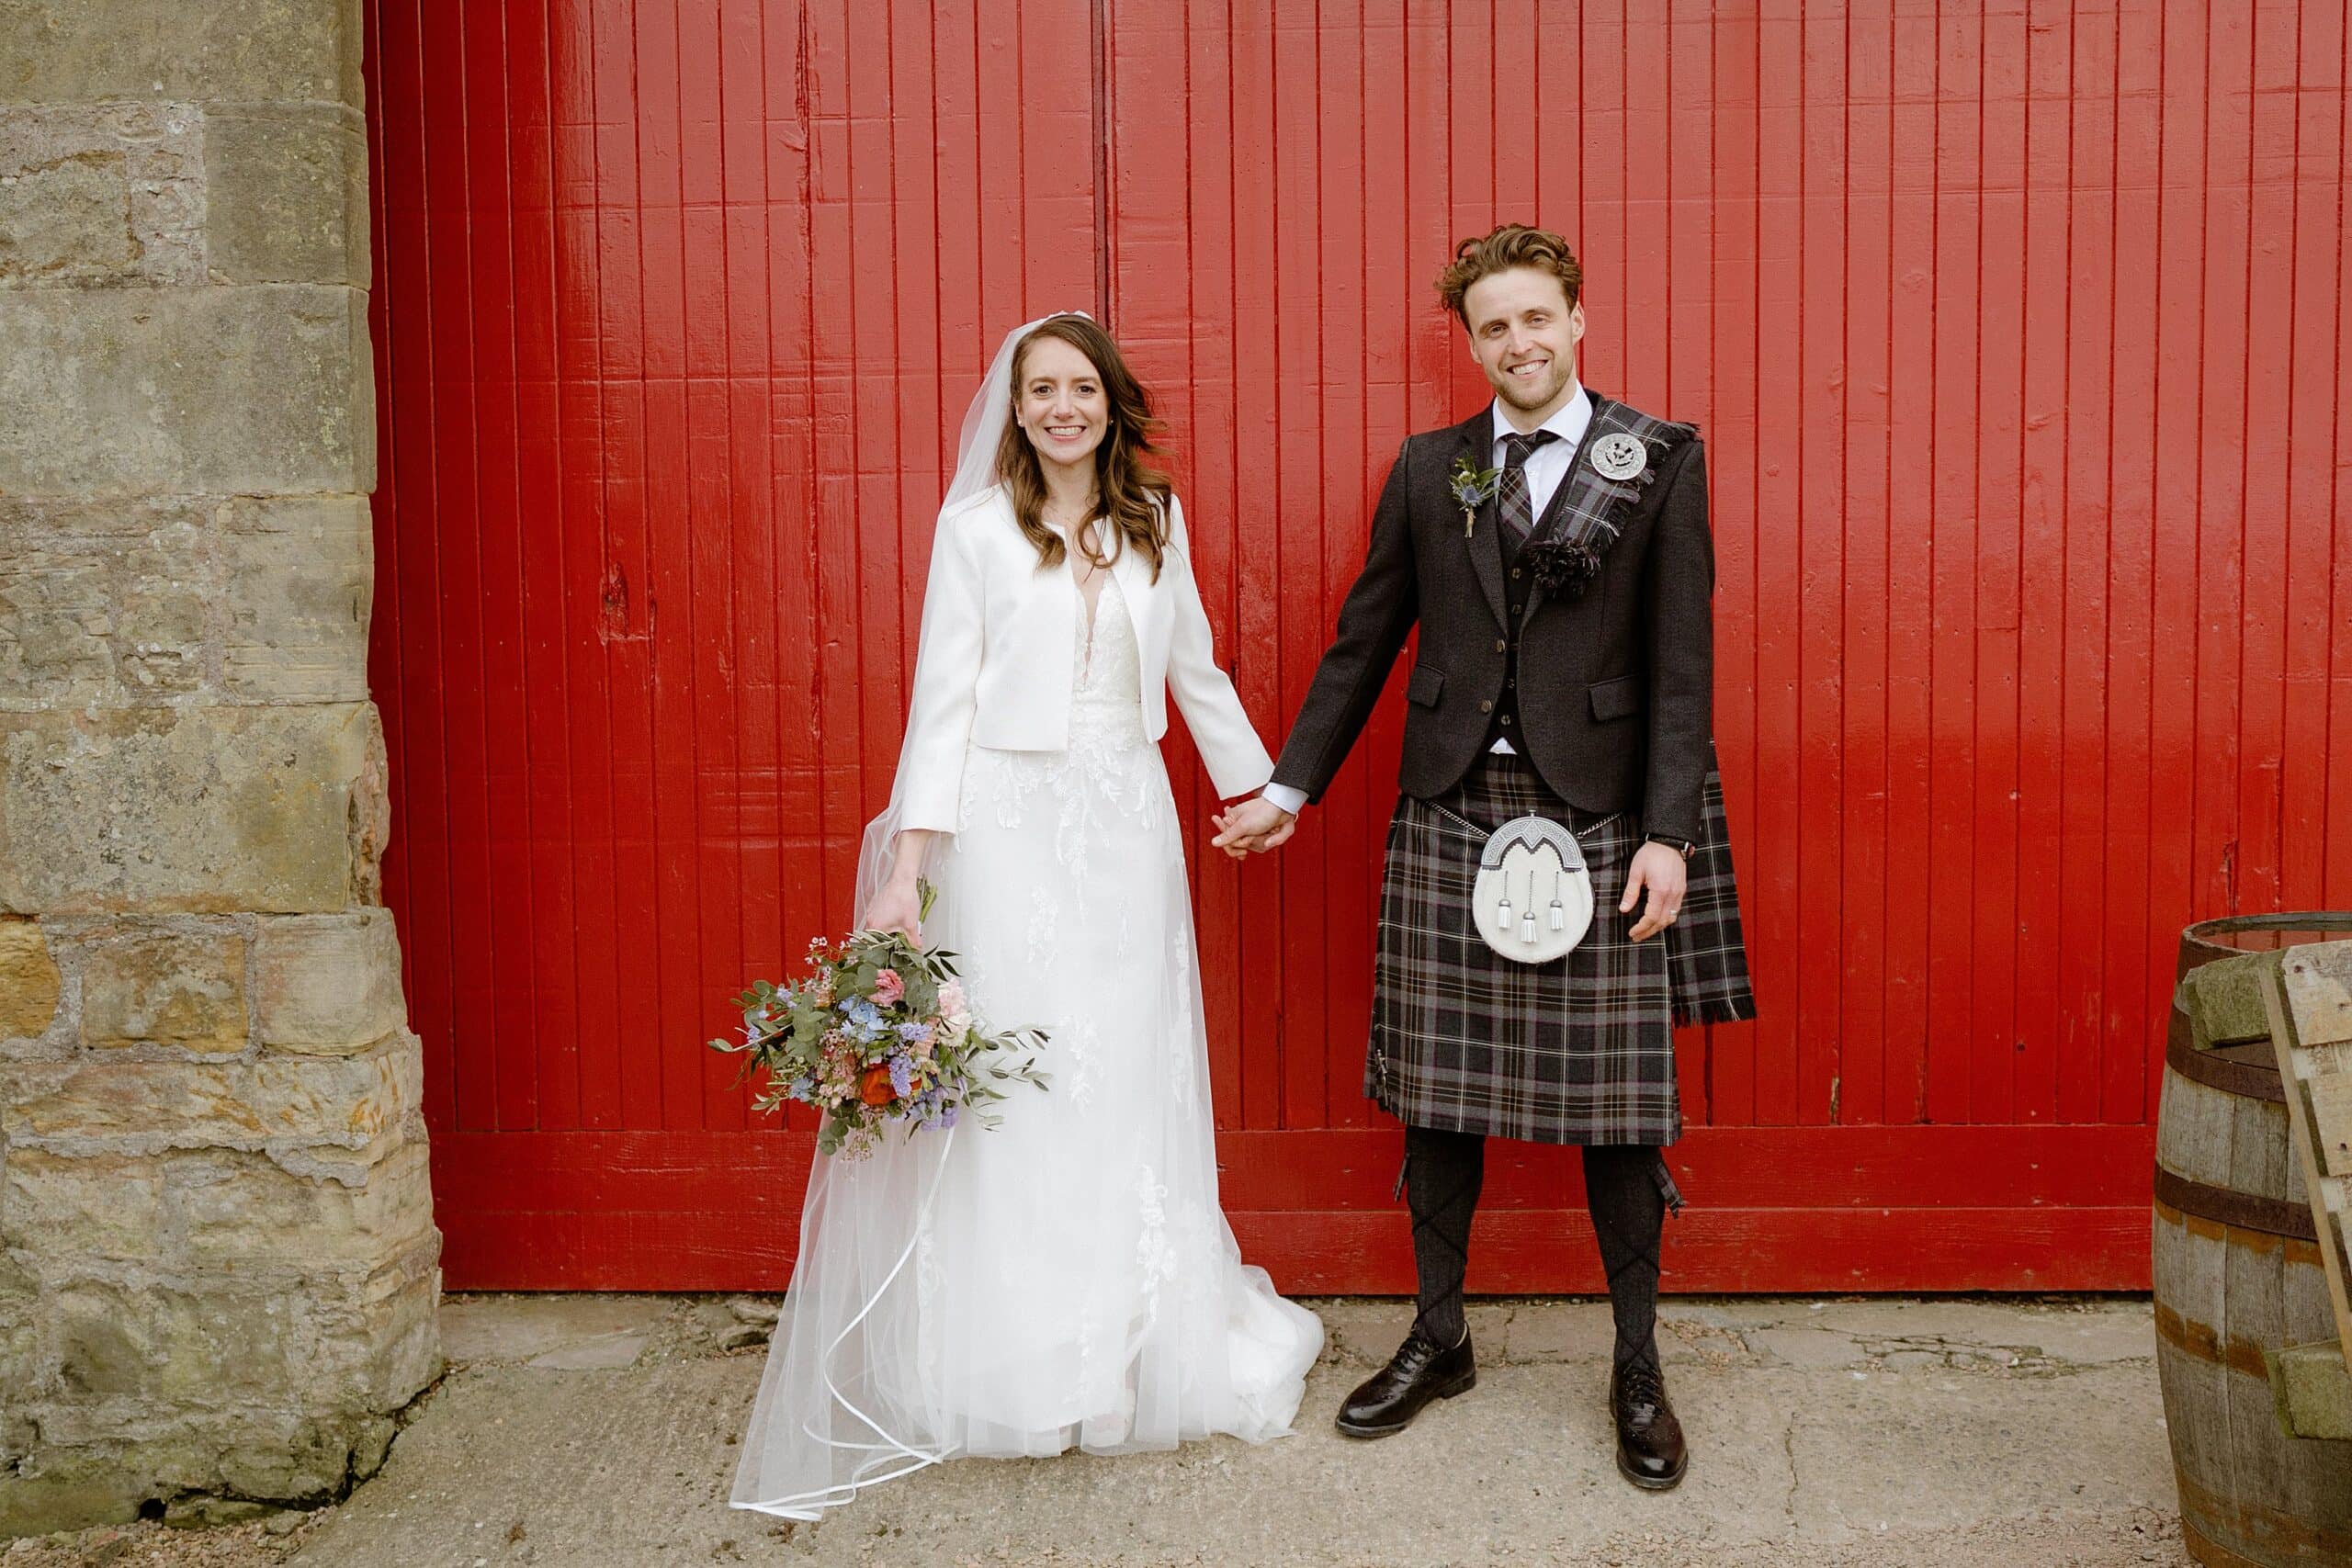 the bride and groom smile and hold hands in front of a red barn door outside kinkell byre scottish wedding venue